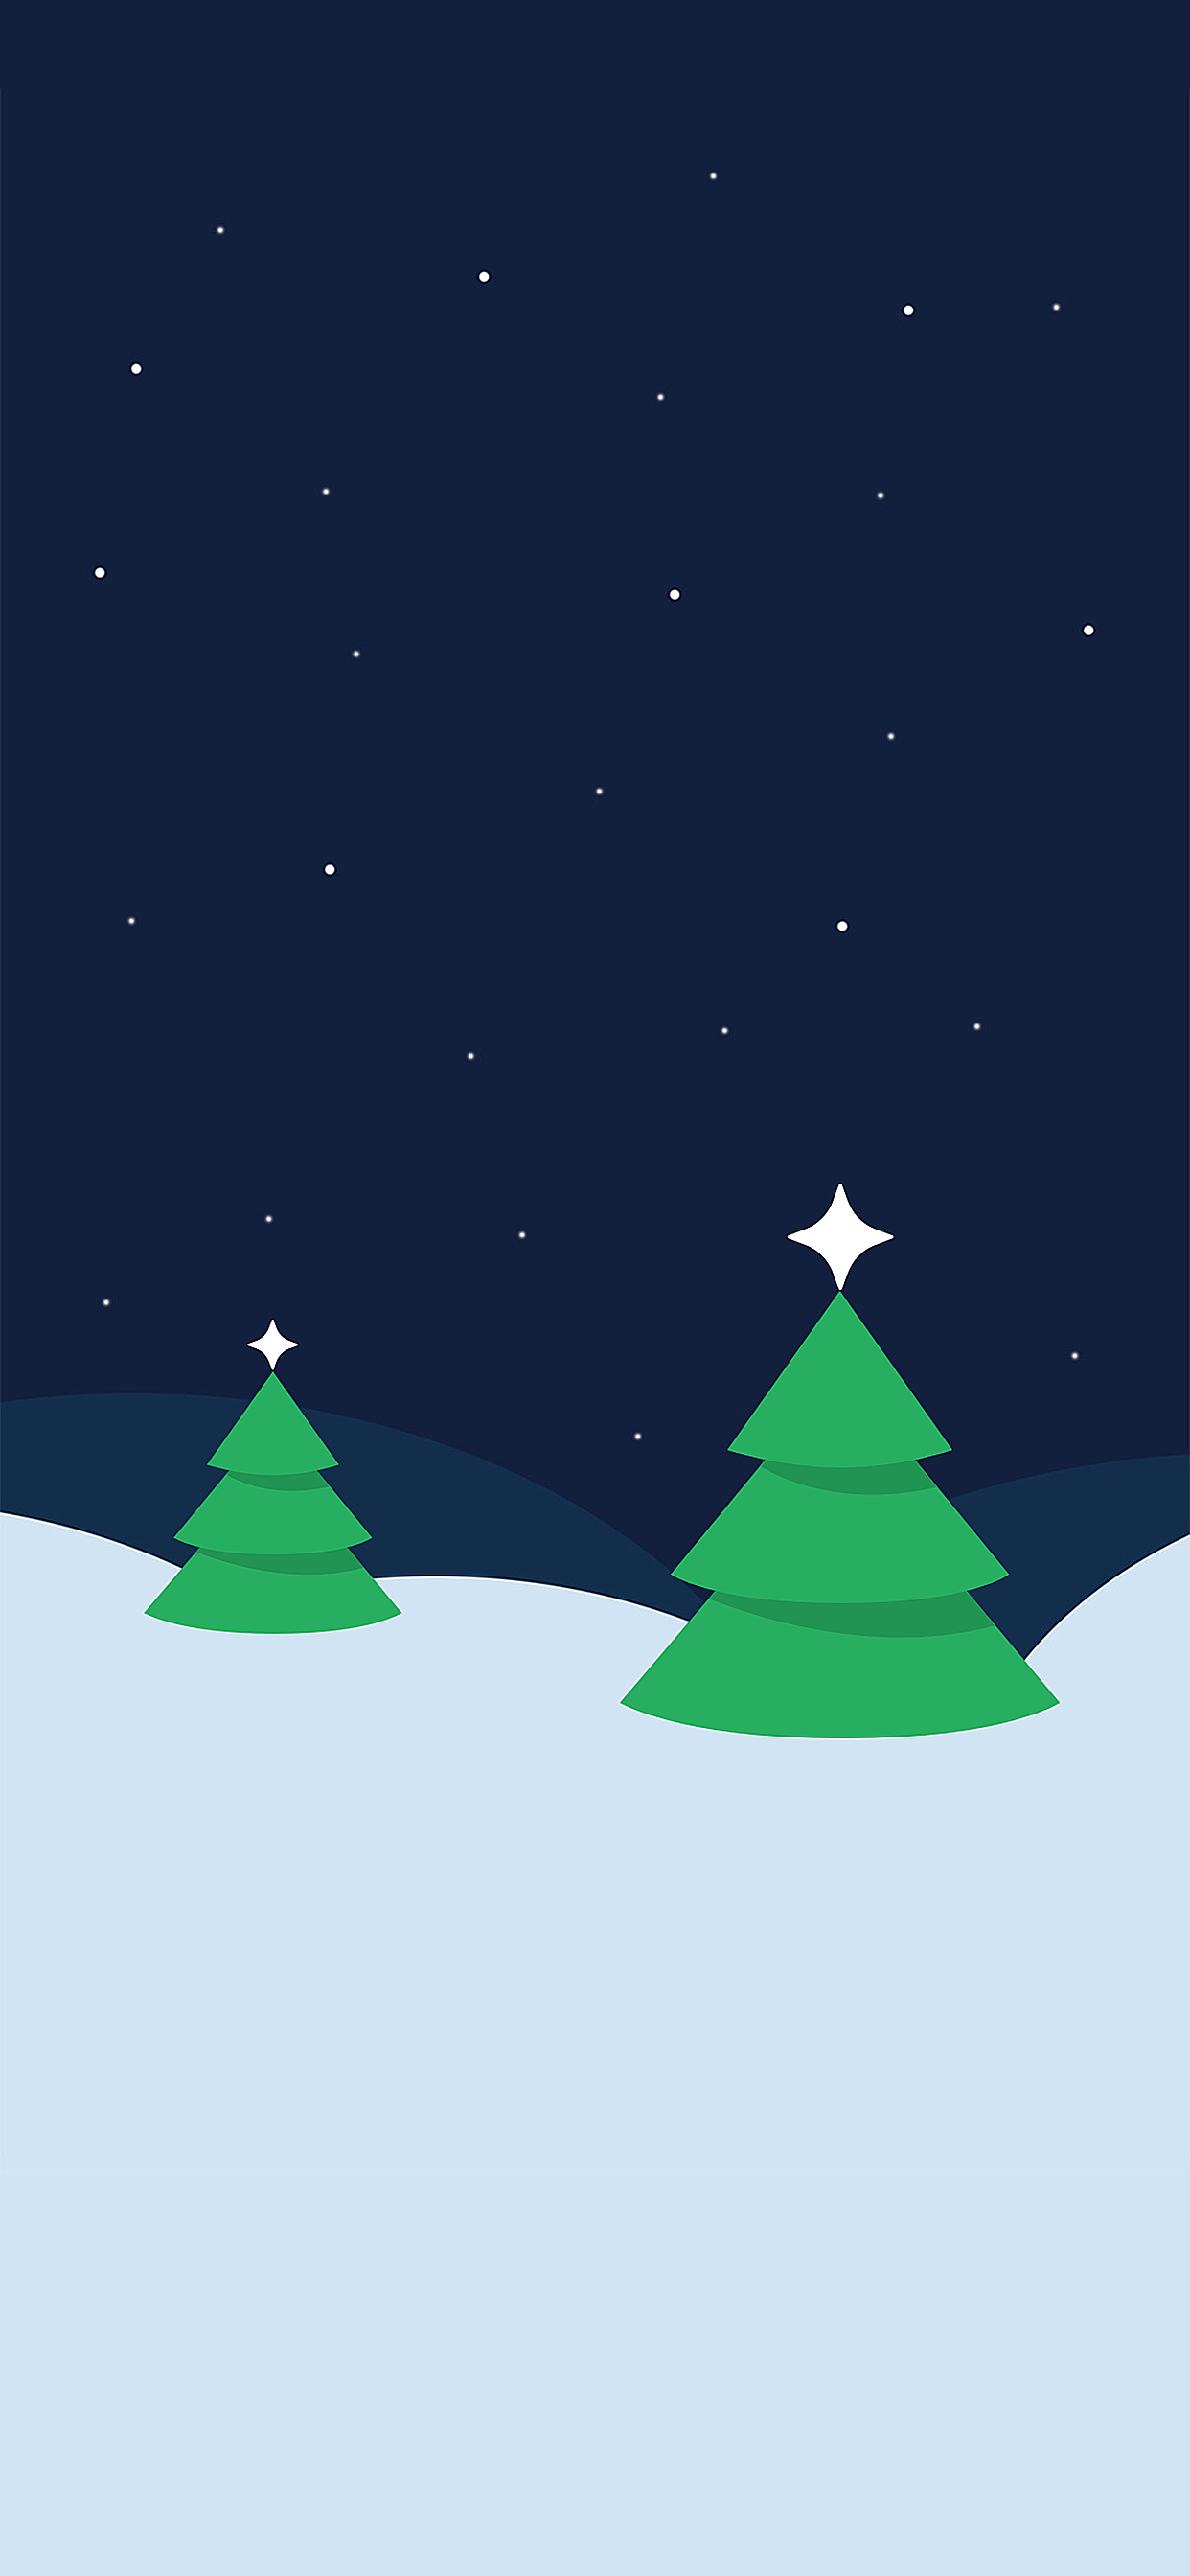 Snowy winter Christmas wallpapers for iPhone